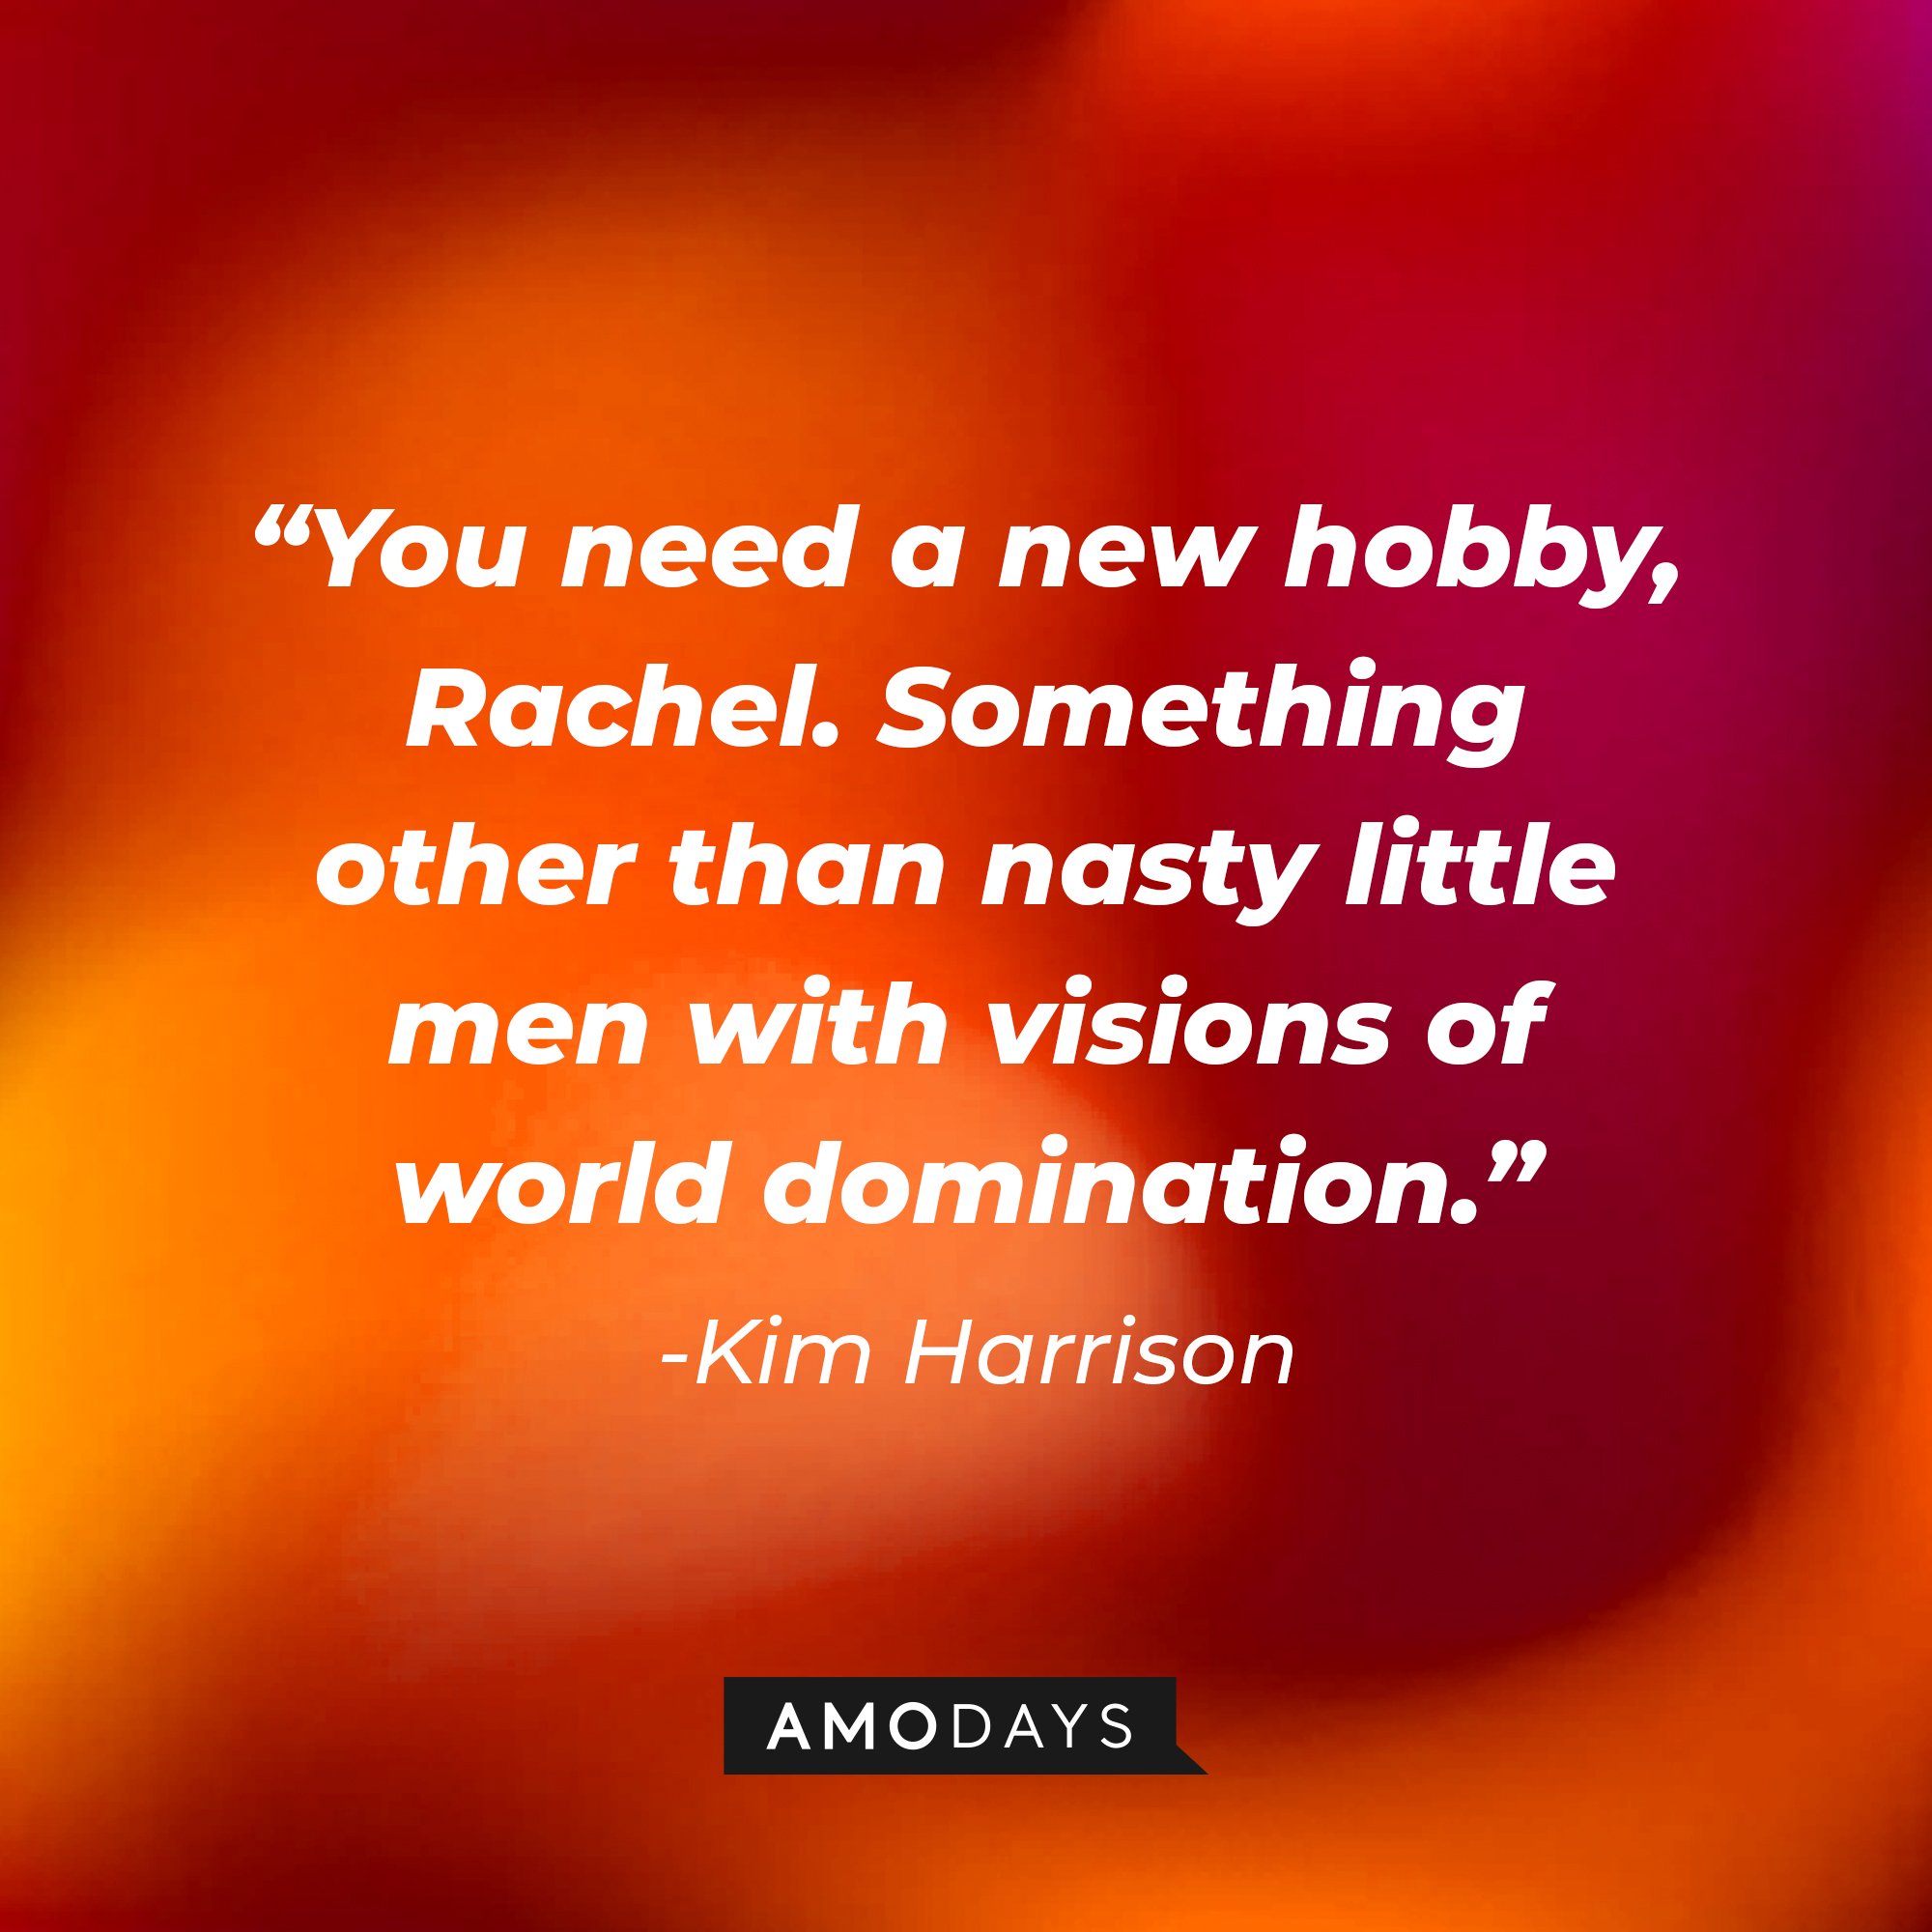 Kim Harrison’s quote: "You need a new hobby, Rachel. Something other than nasty little men with visions of world domination." | Image: AmoDays